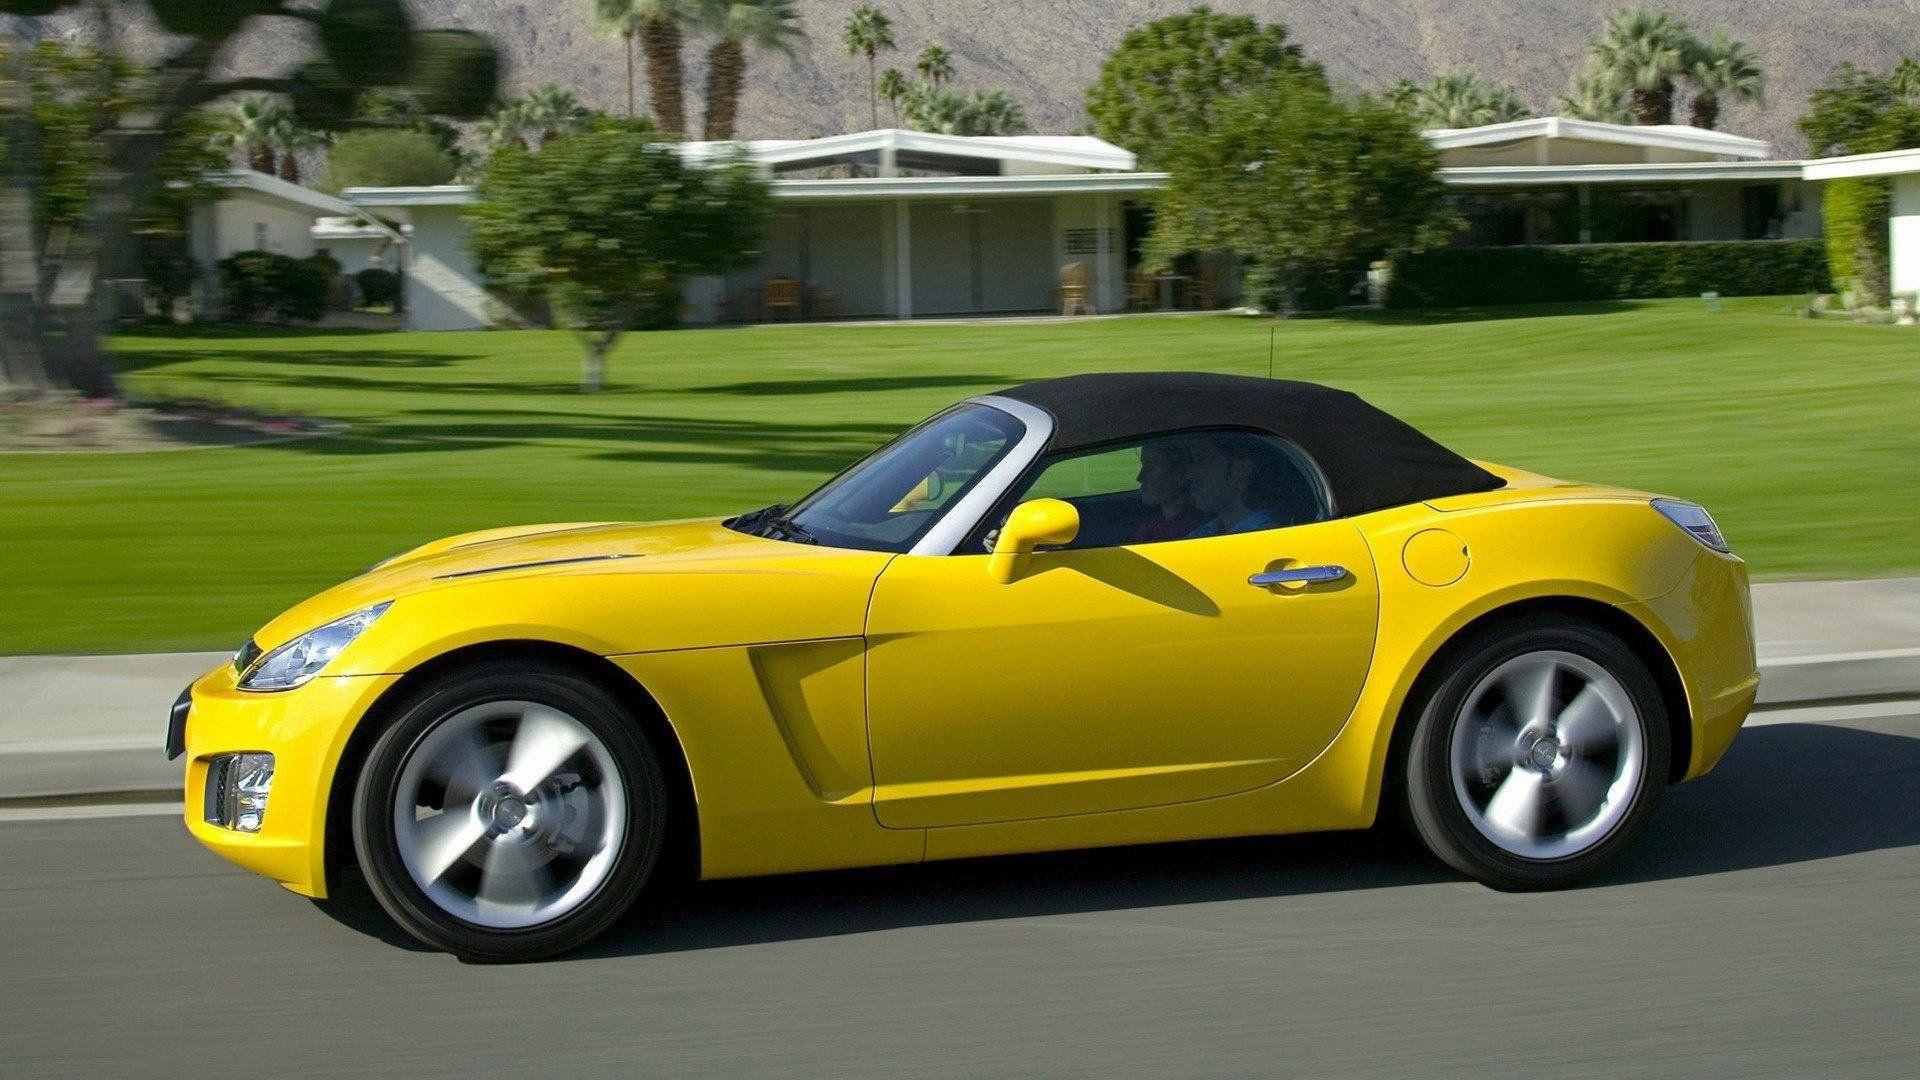 Opel GT Saturn sky HD Wallpaper for iPhone, Android & Desktop Background